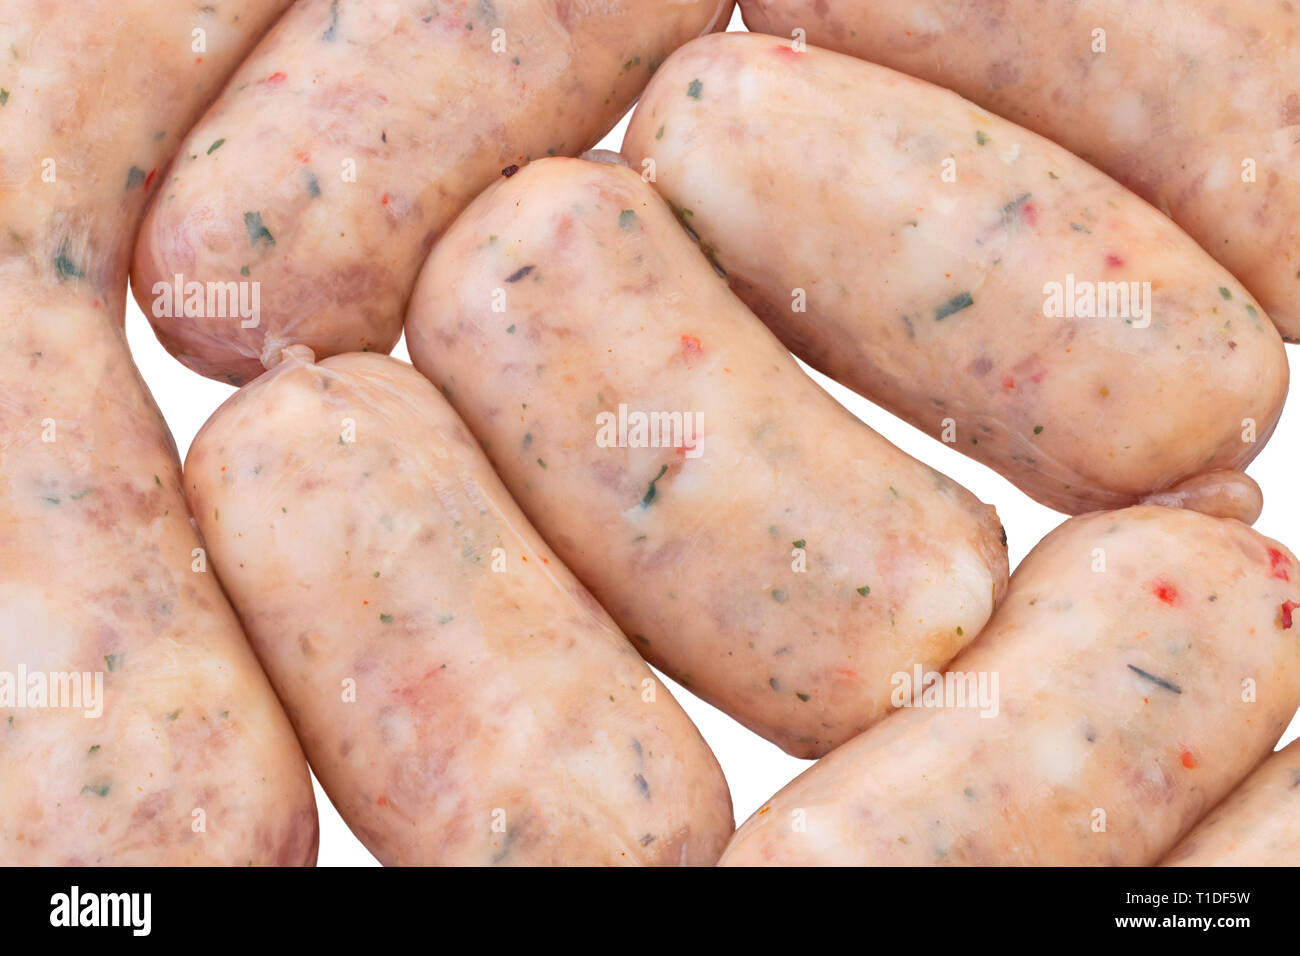 Group of raw sausage isolated on white background. Stock Photo